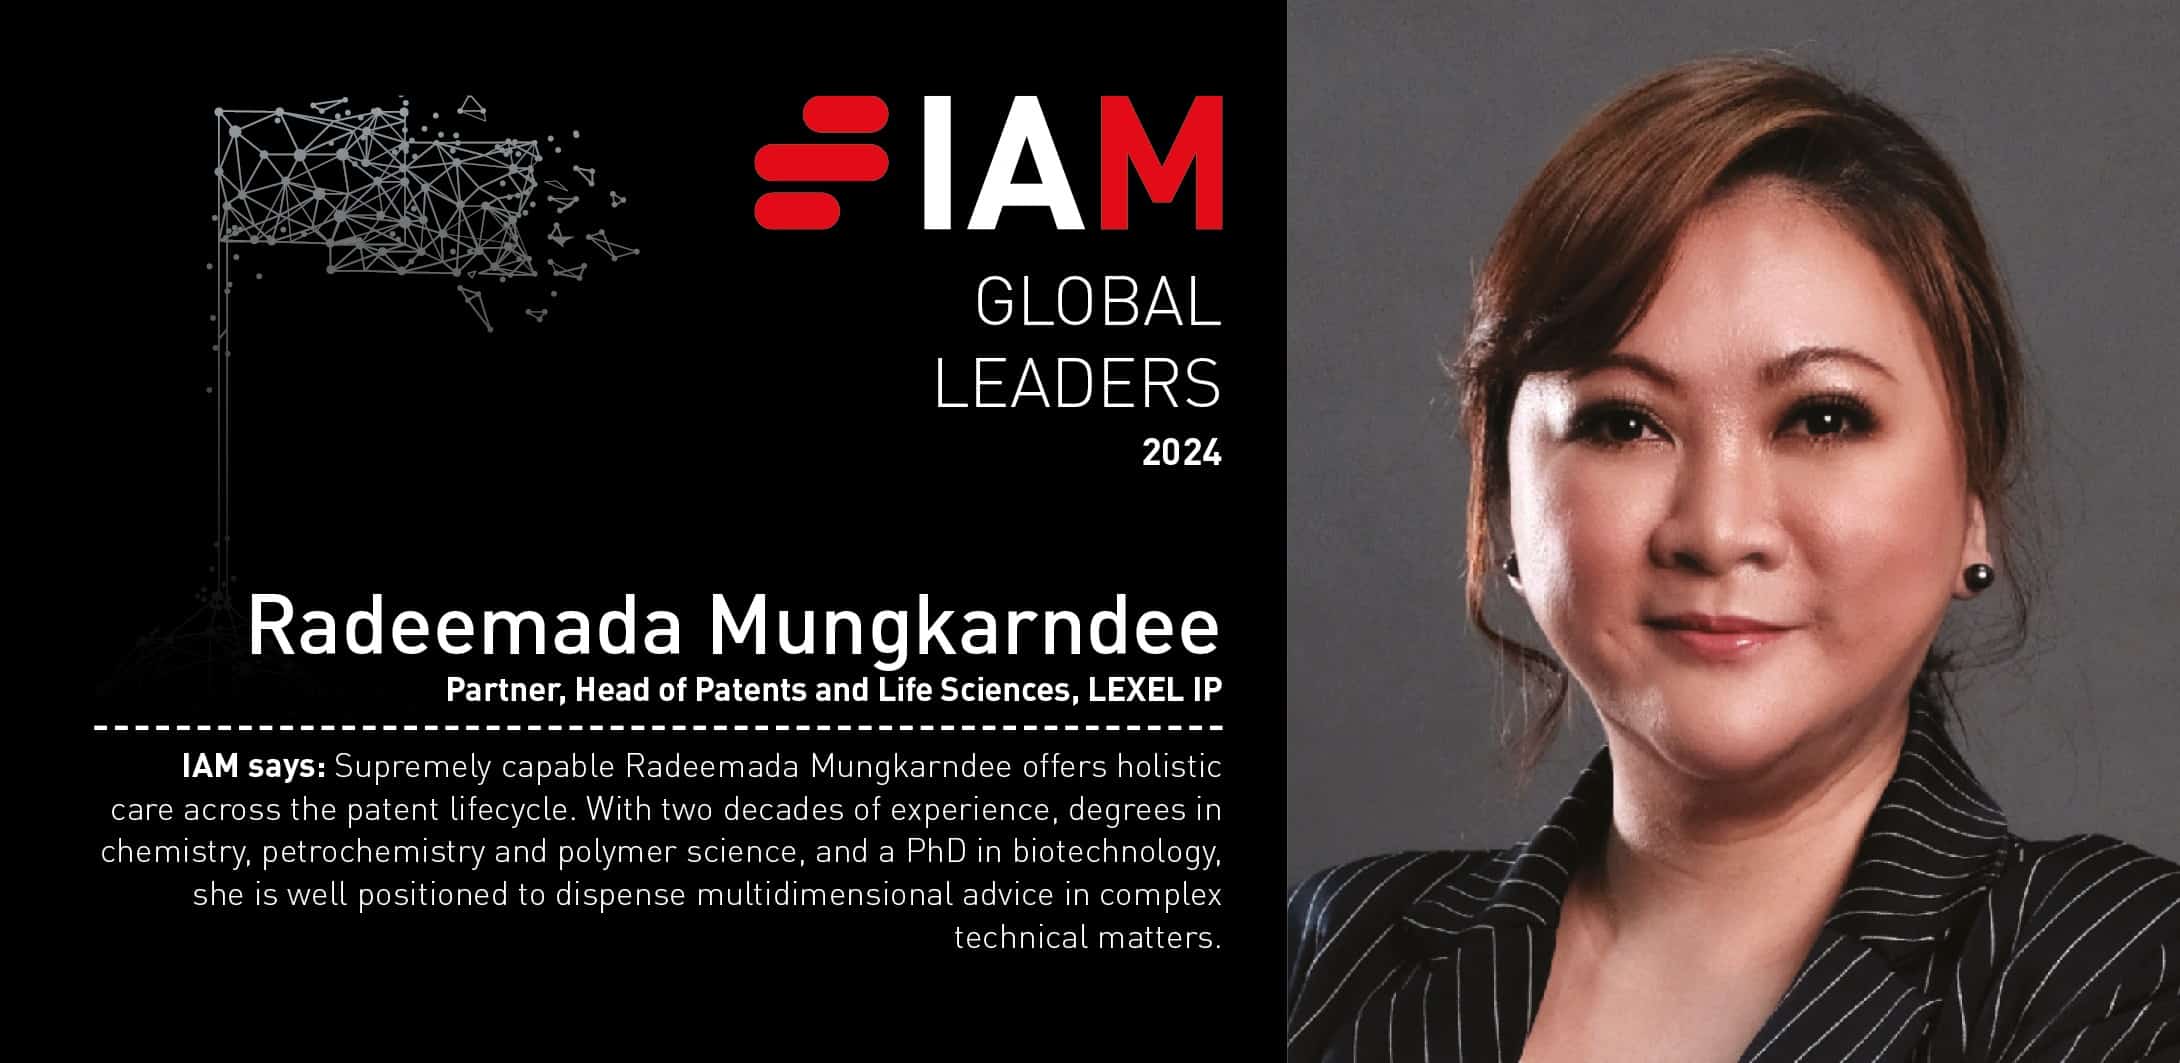 LEXEL Proudly Celebrates Dr. Radeemada Mungkarndee’s Recognition as an IAM Global Leader 2024 in Patent Practice